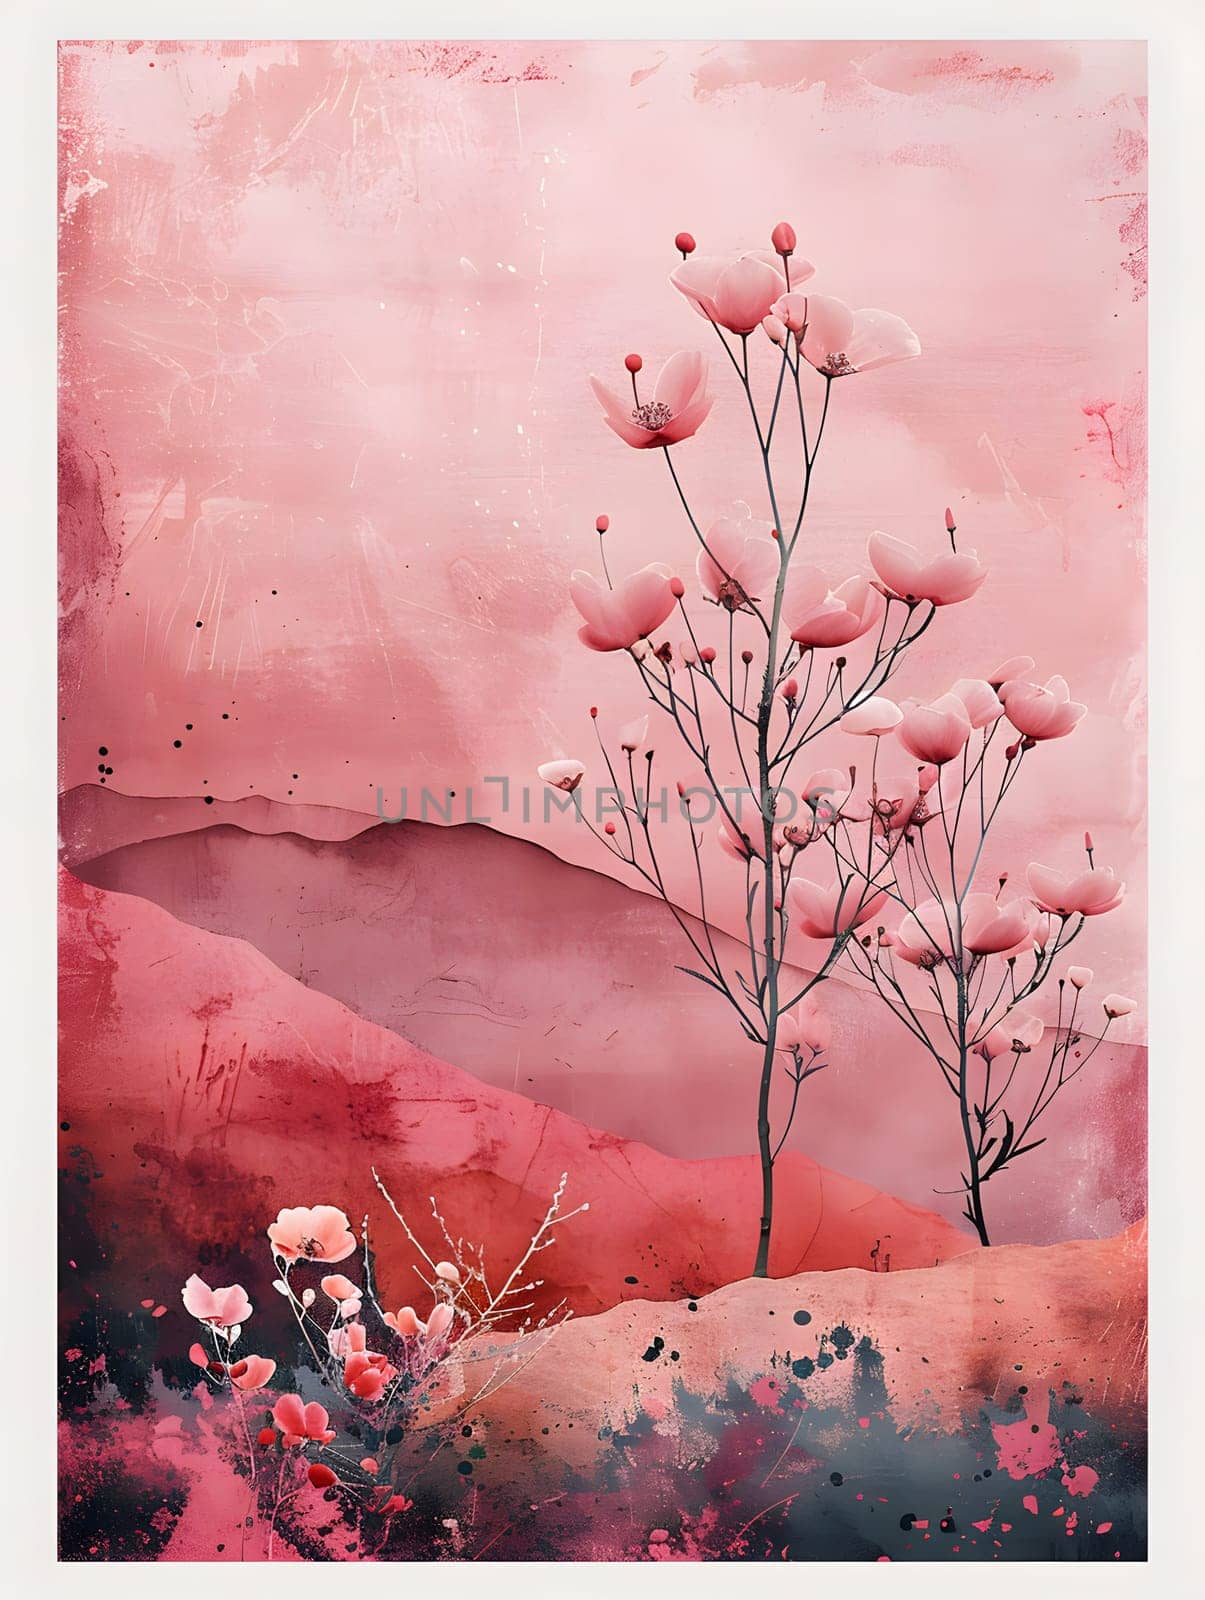 An artistic representation of a tree with pink flowers on a pink background, showcasing the beauty of nature in a creative and colorful way